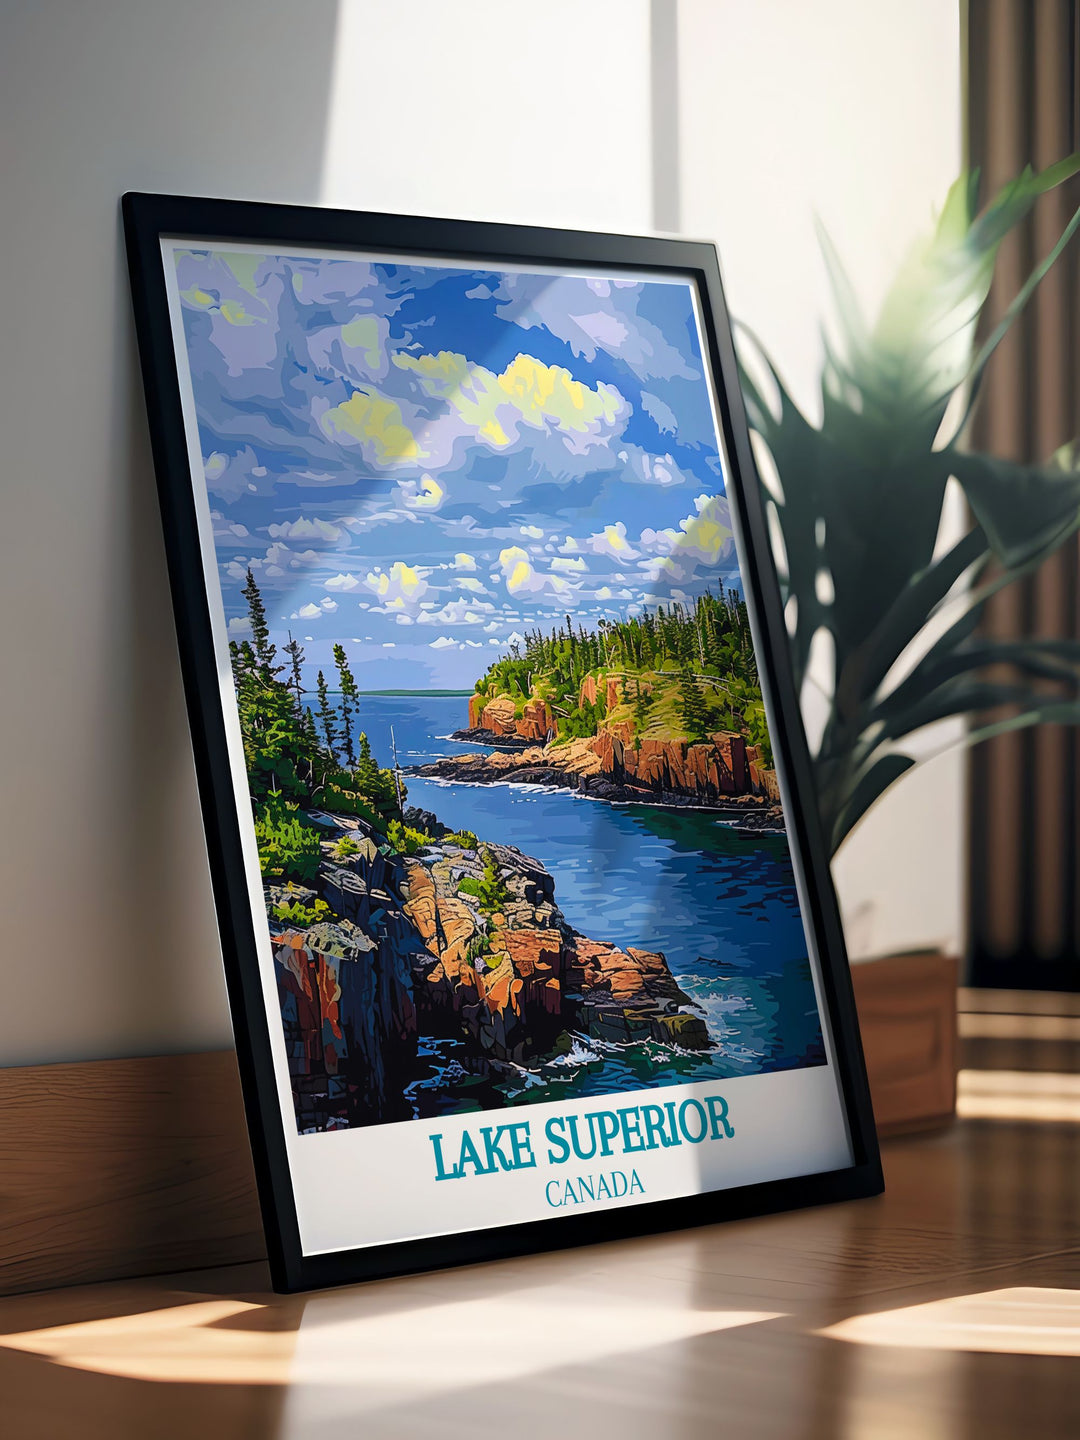 Lake Superiors pristine waters and beautiful beaches depicted in a colorful art print, perfect for nature inspired home decor.